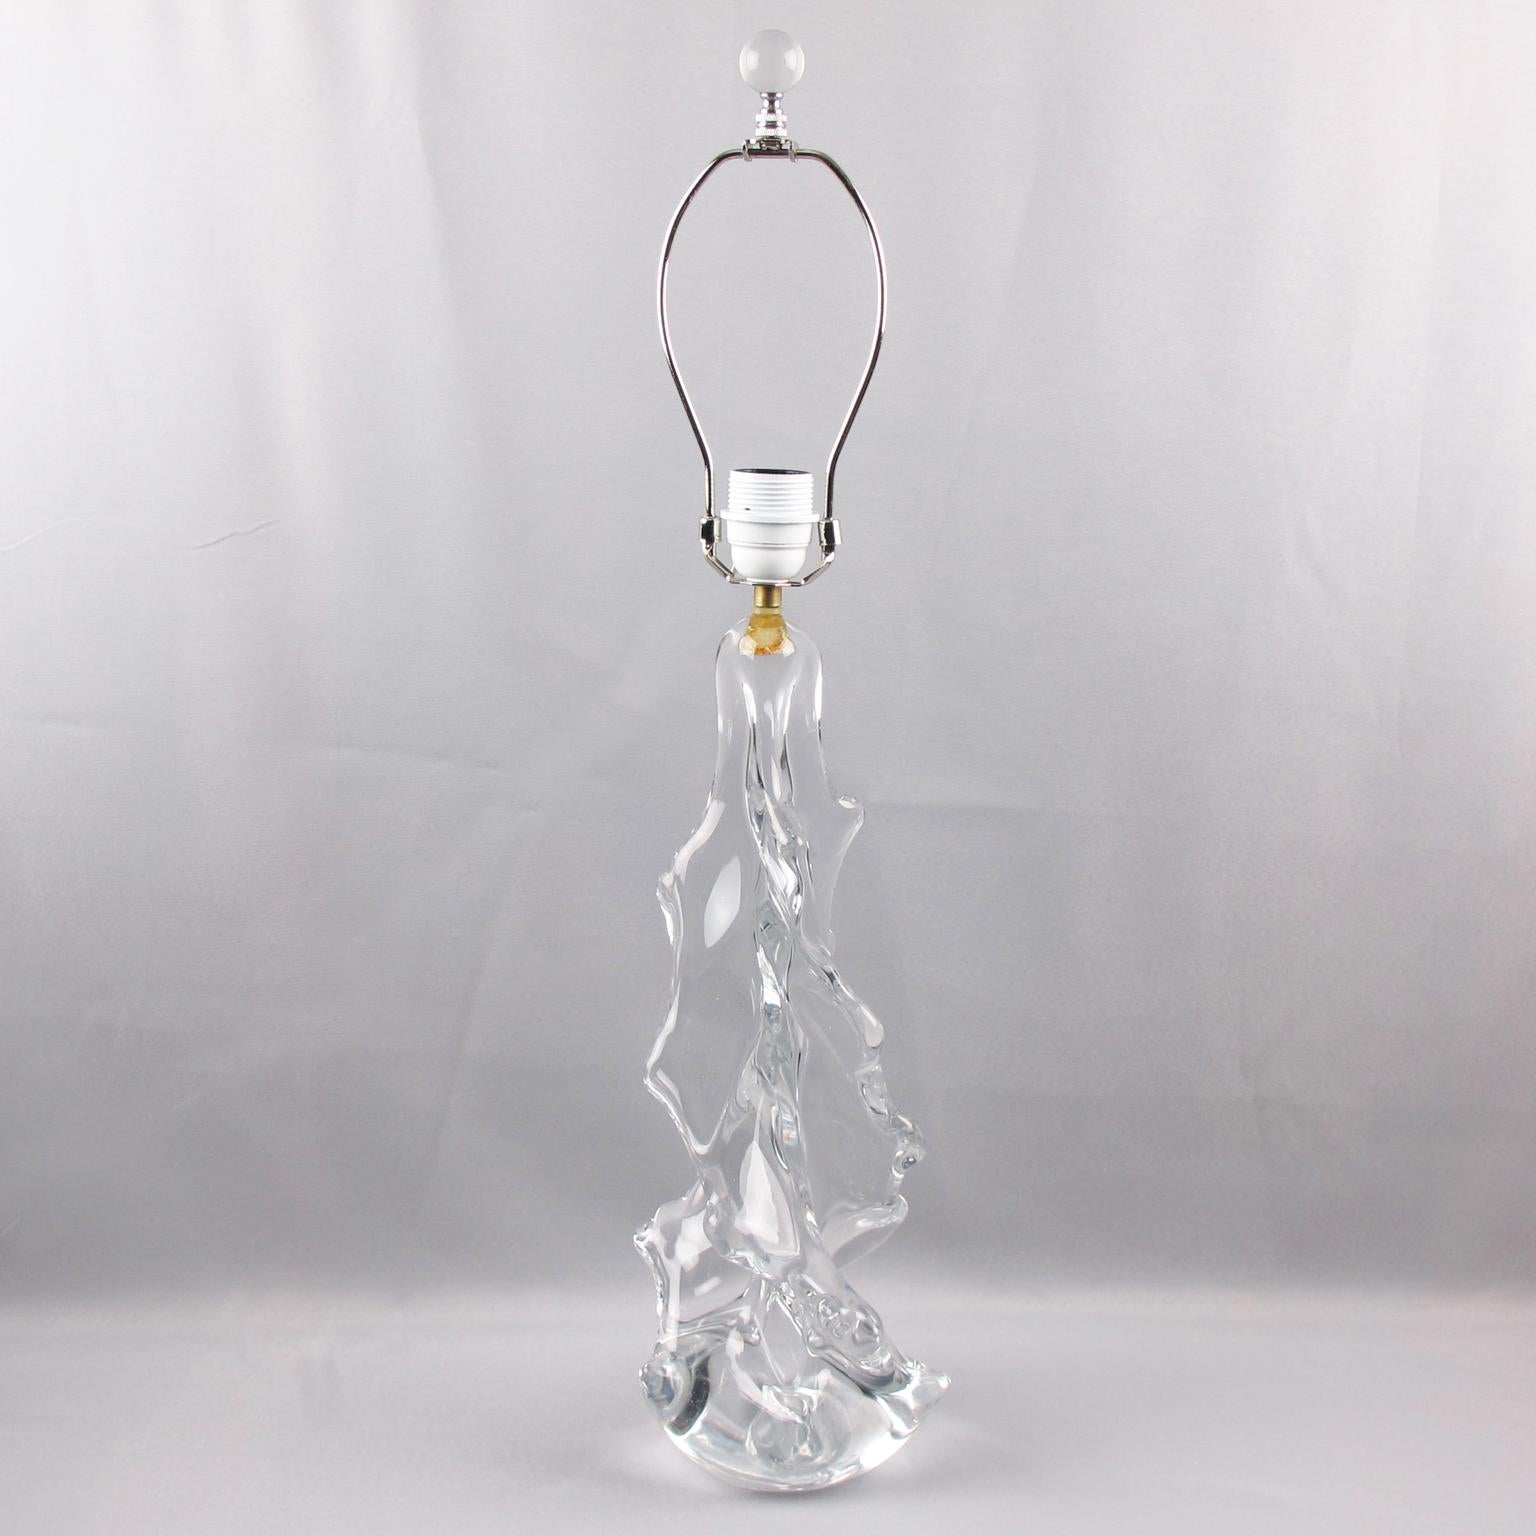 Charles Schneider Crystal Art Glass Table Lamp, 1950s For Sale 1